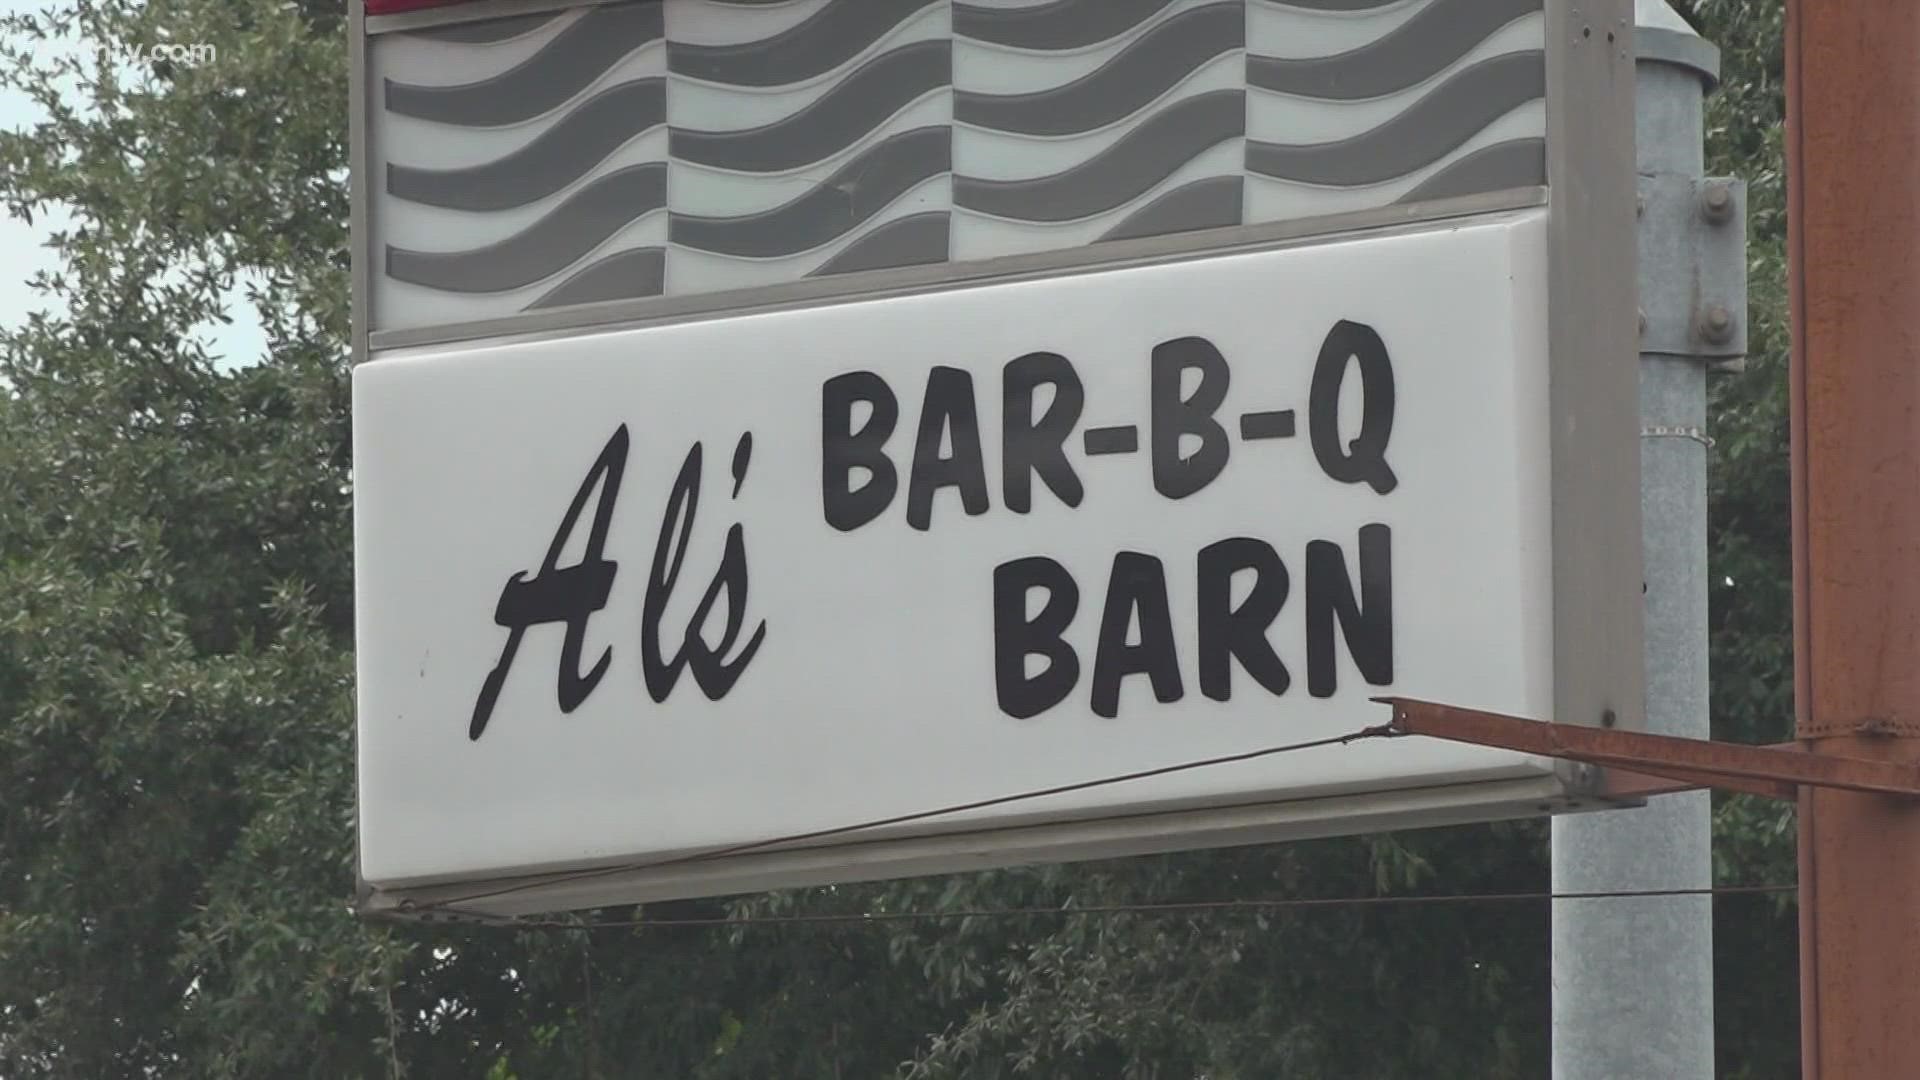 Though Al's BBQ Barn is shutting down, they still plan to sell meat online.